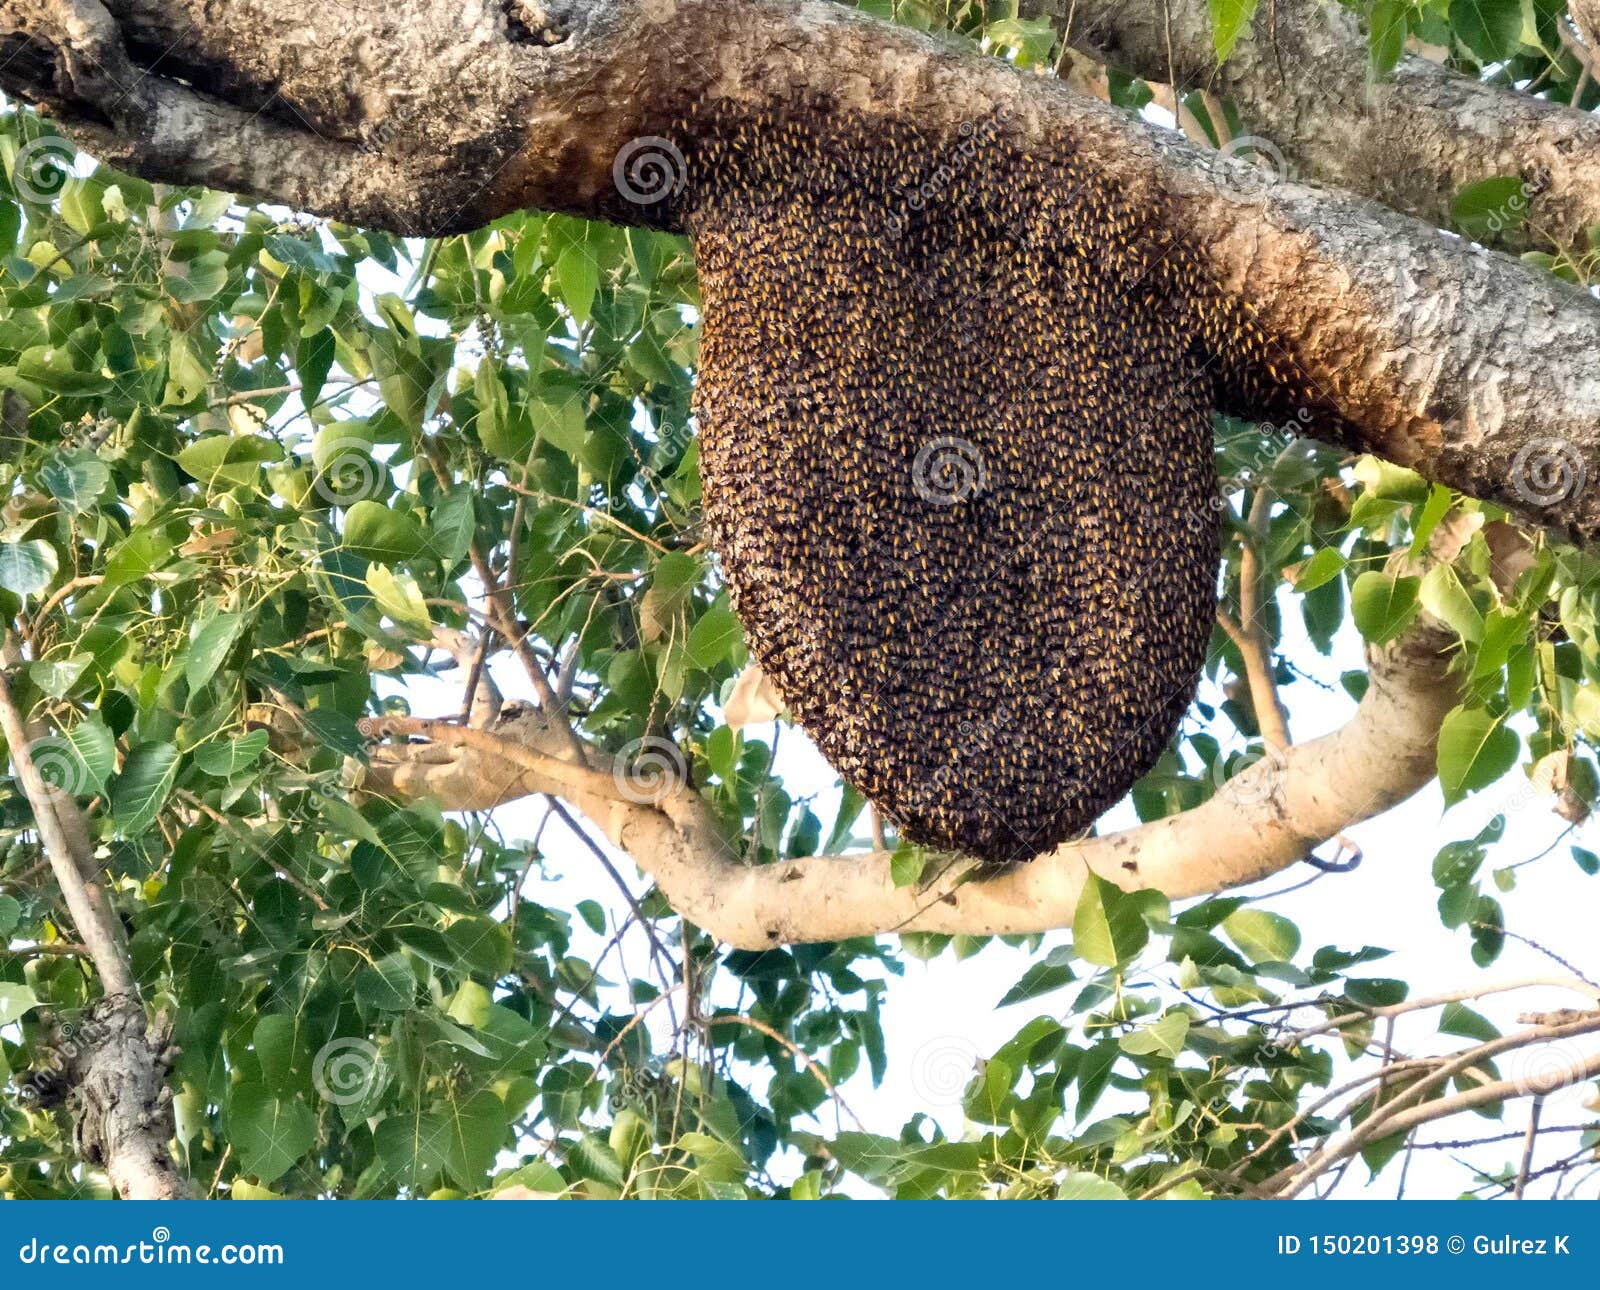 Beehive on peepal tree, Bee hive in its natural form.